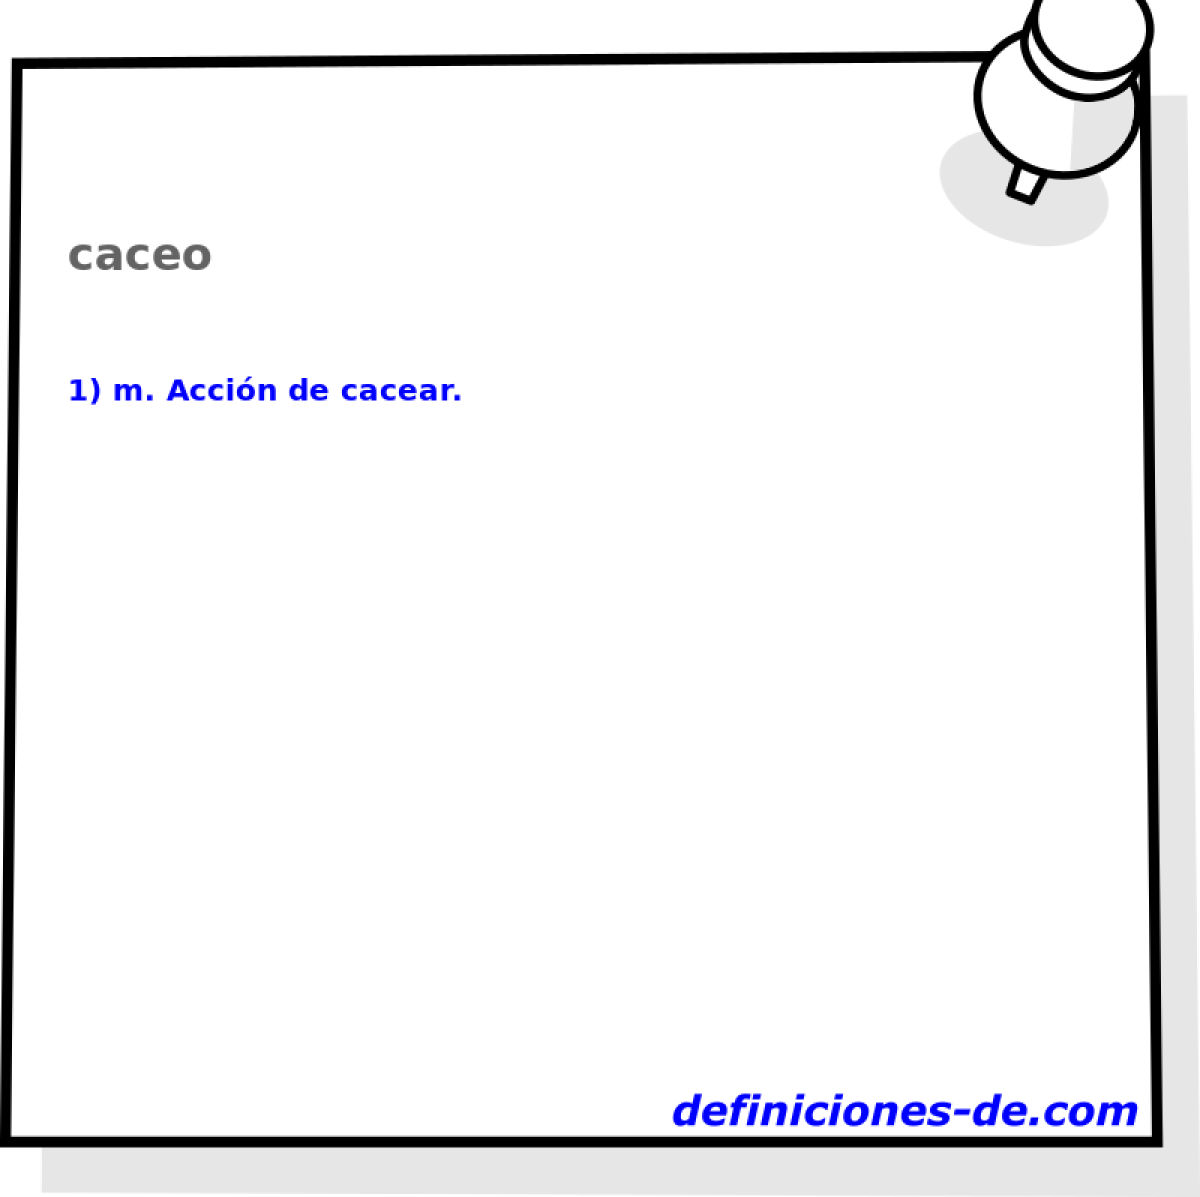 caceo 